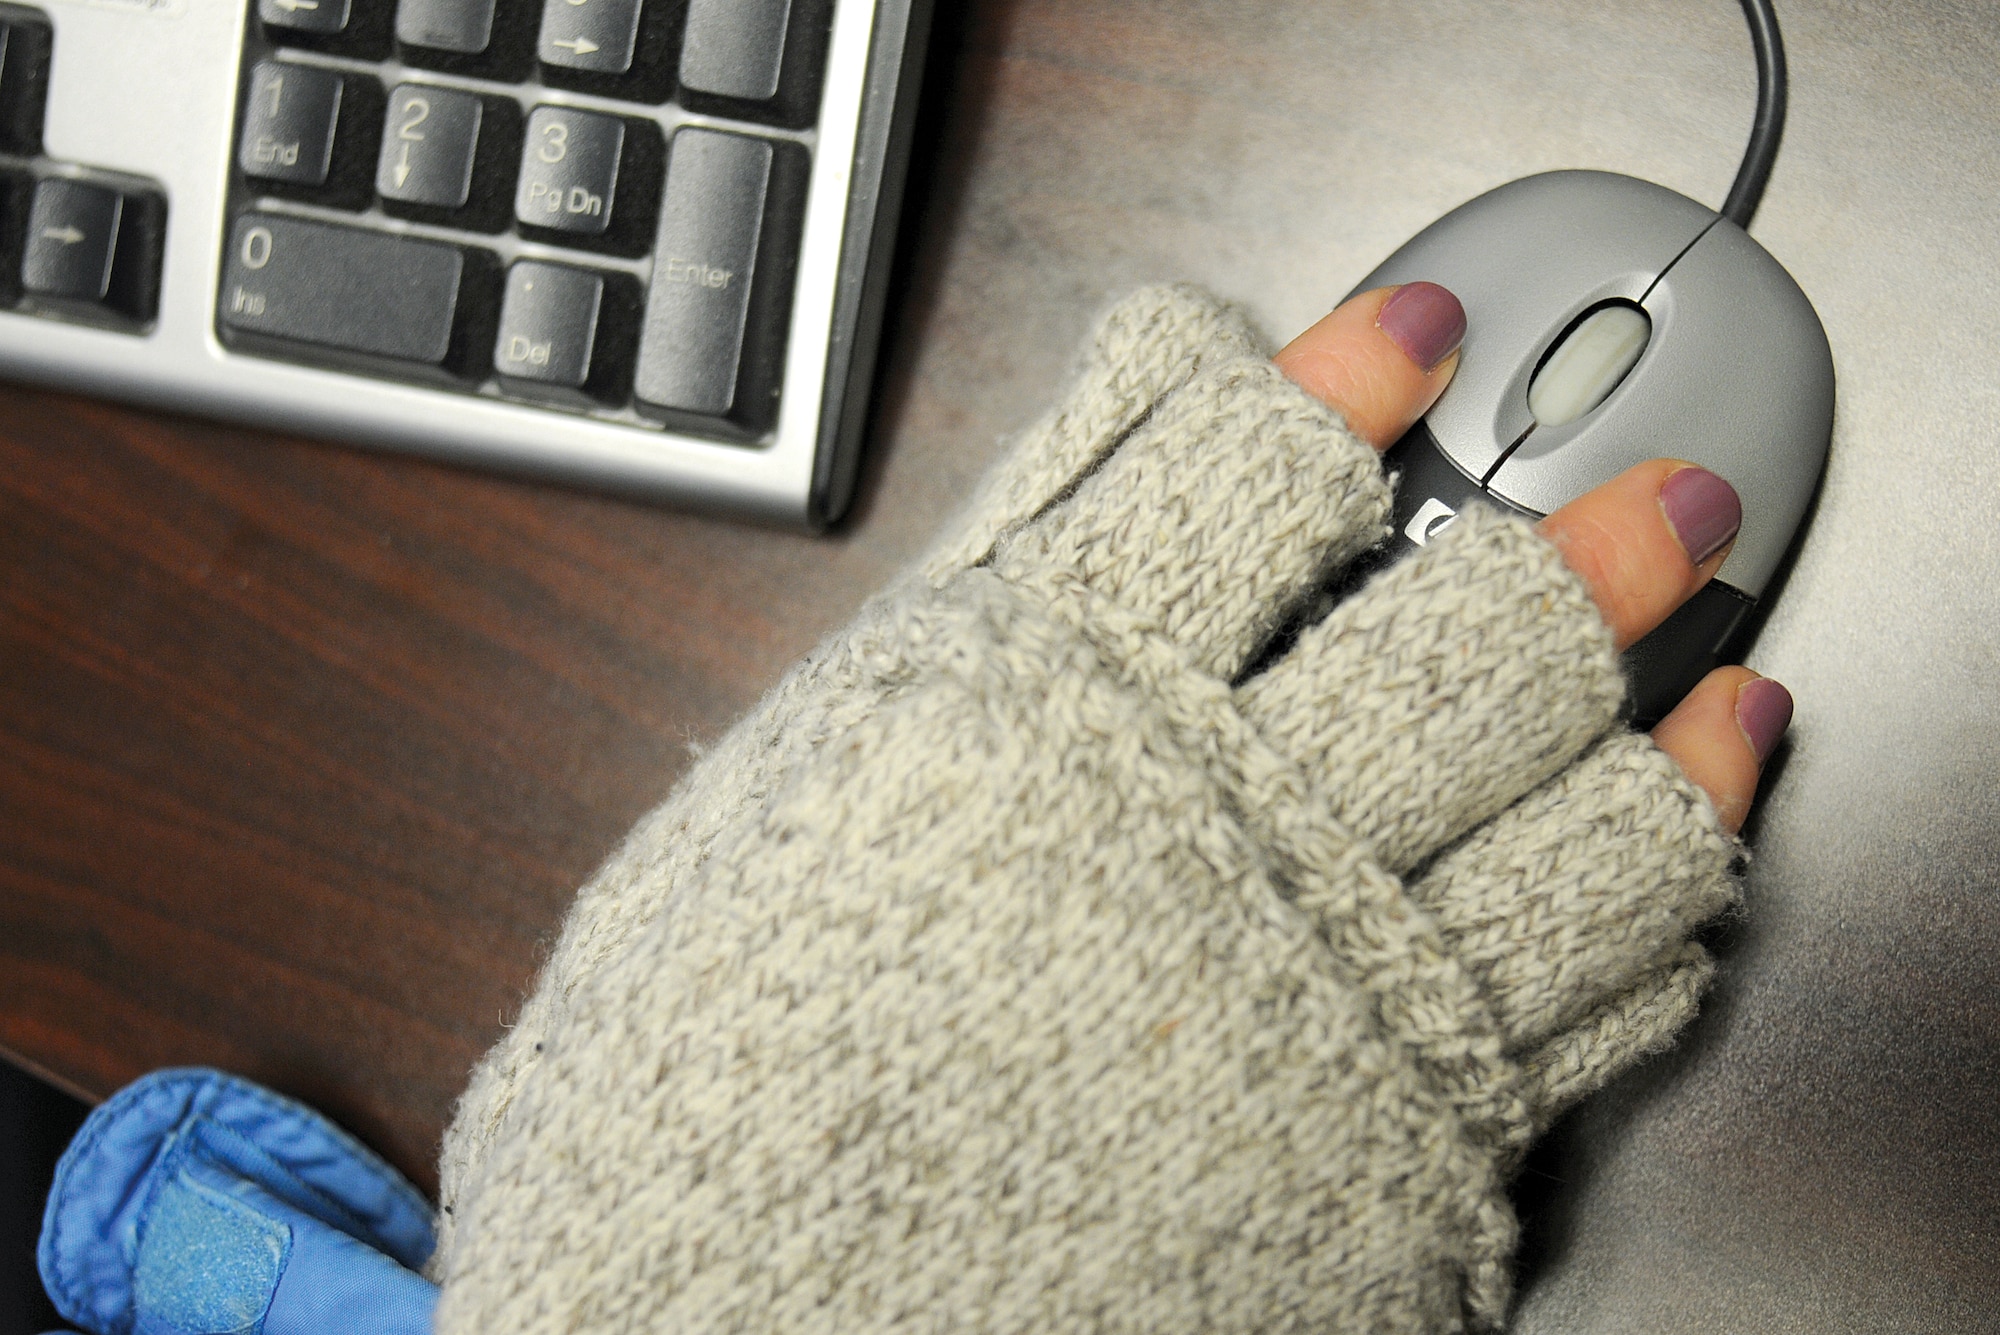 Cold weather may tempt you to plug in that space heater at work.  But don’t. They are major safety hazards and greedy energy guzzlers. (Air Force photo illustration by Margo Wright)